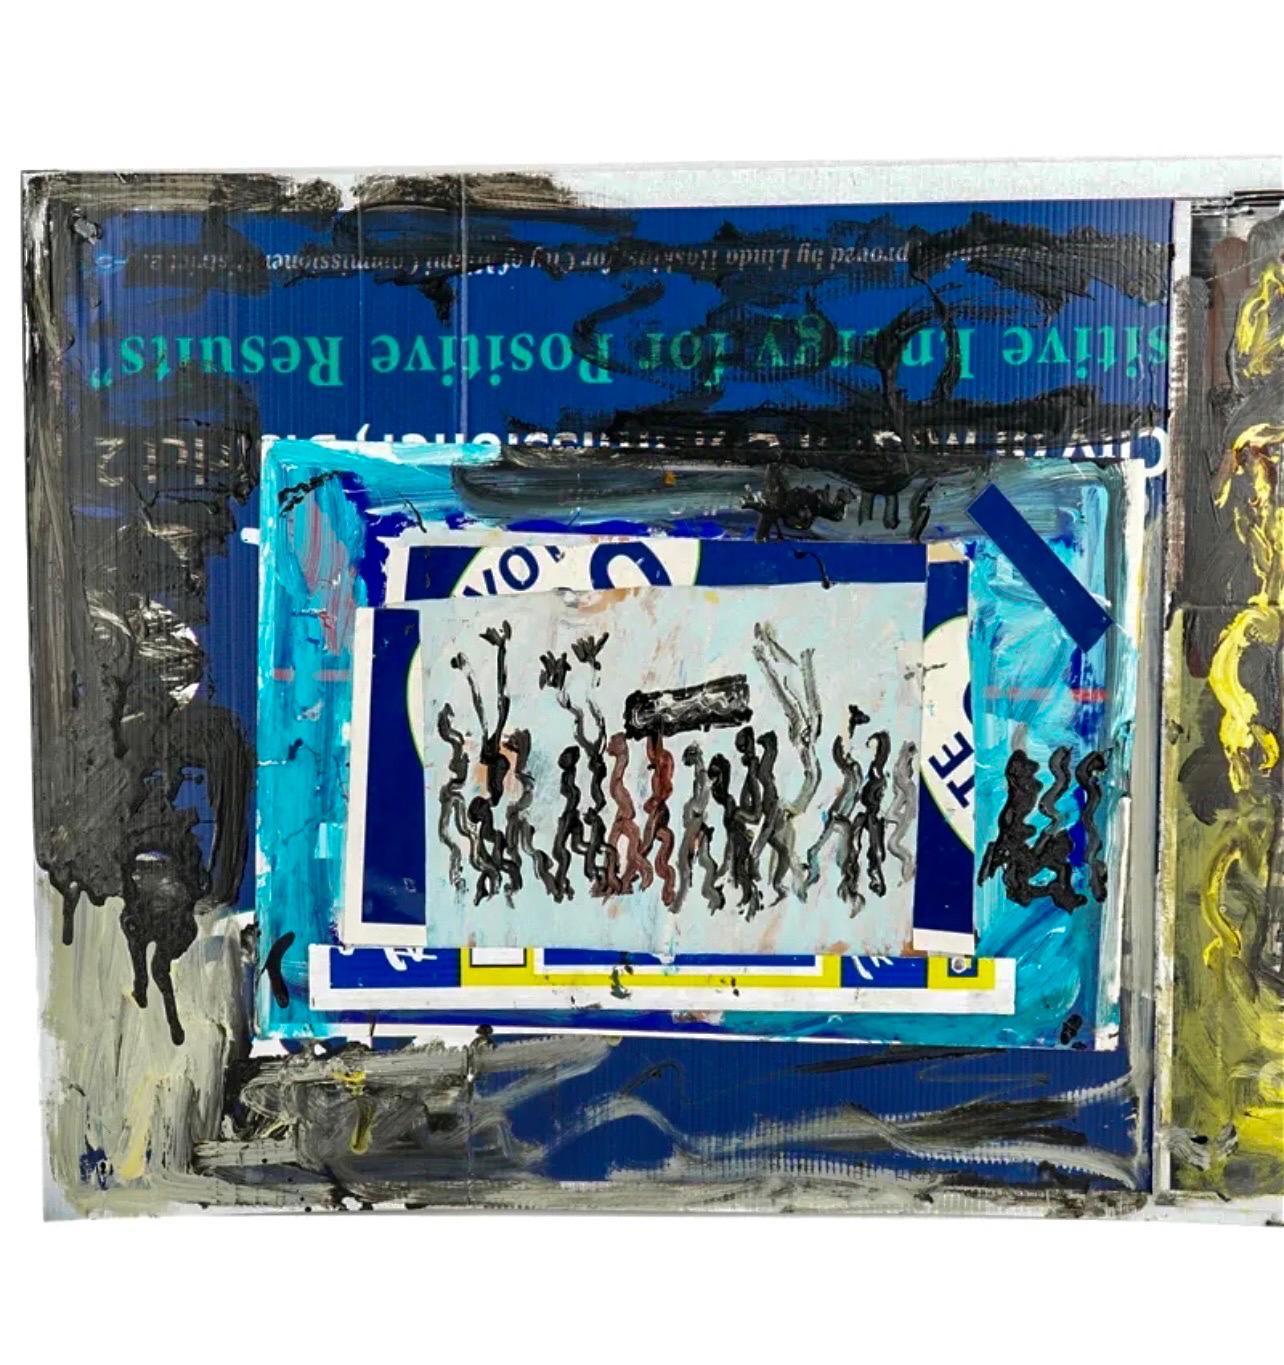 Purvis Young  (1943-2010)
Mixed media collage  oil on poster board painting. Painted atop a voting advertisement sign.
Signed in multiple places on piece 